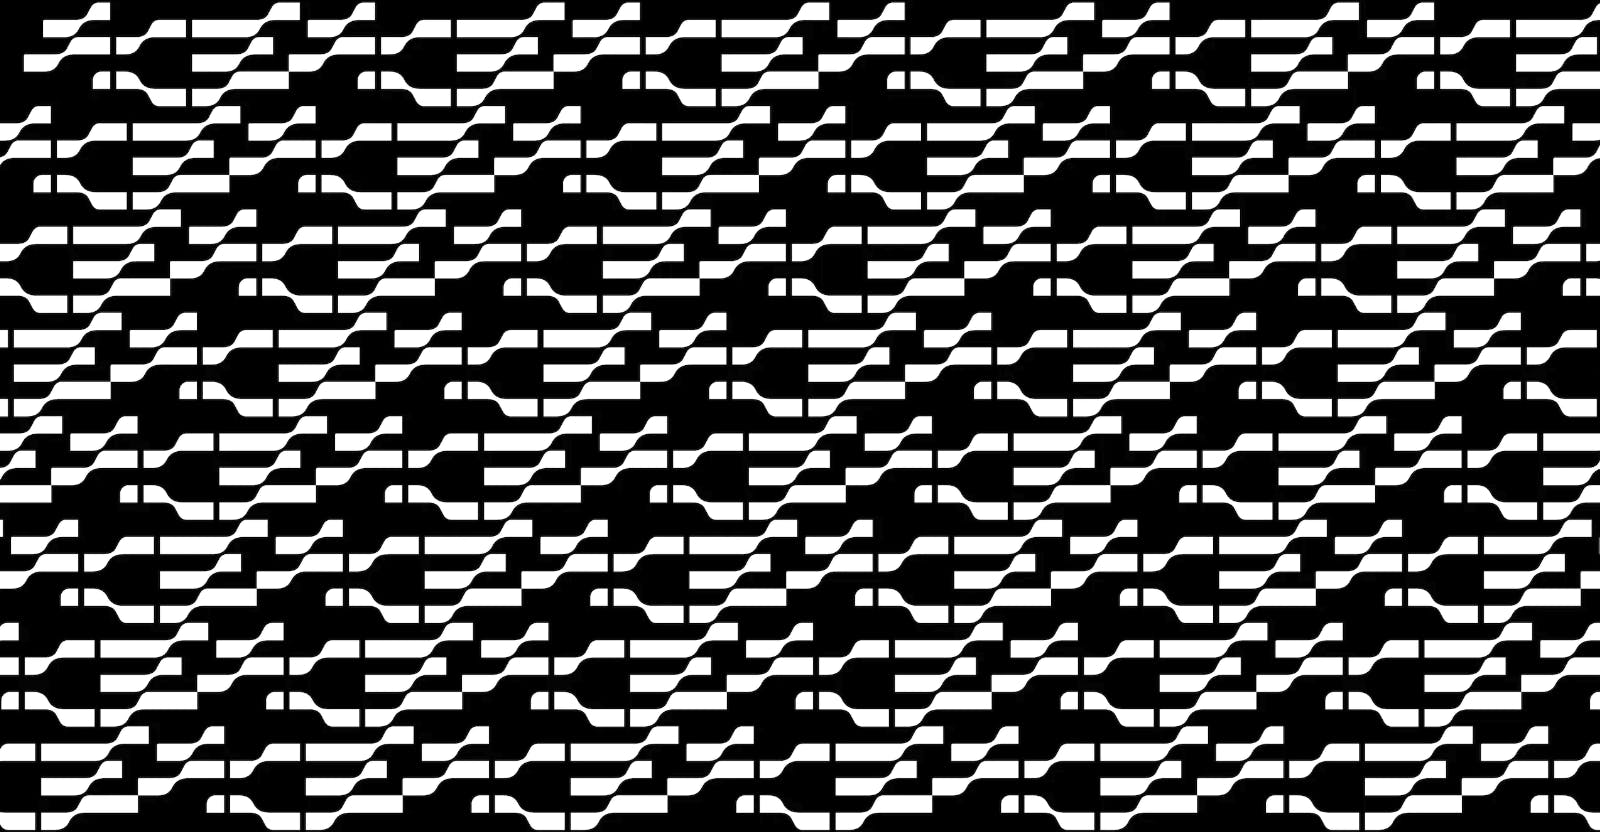 Ace repeat pattern from Smorgasbord